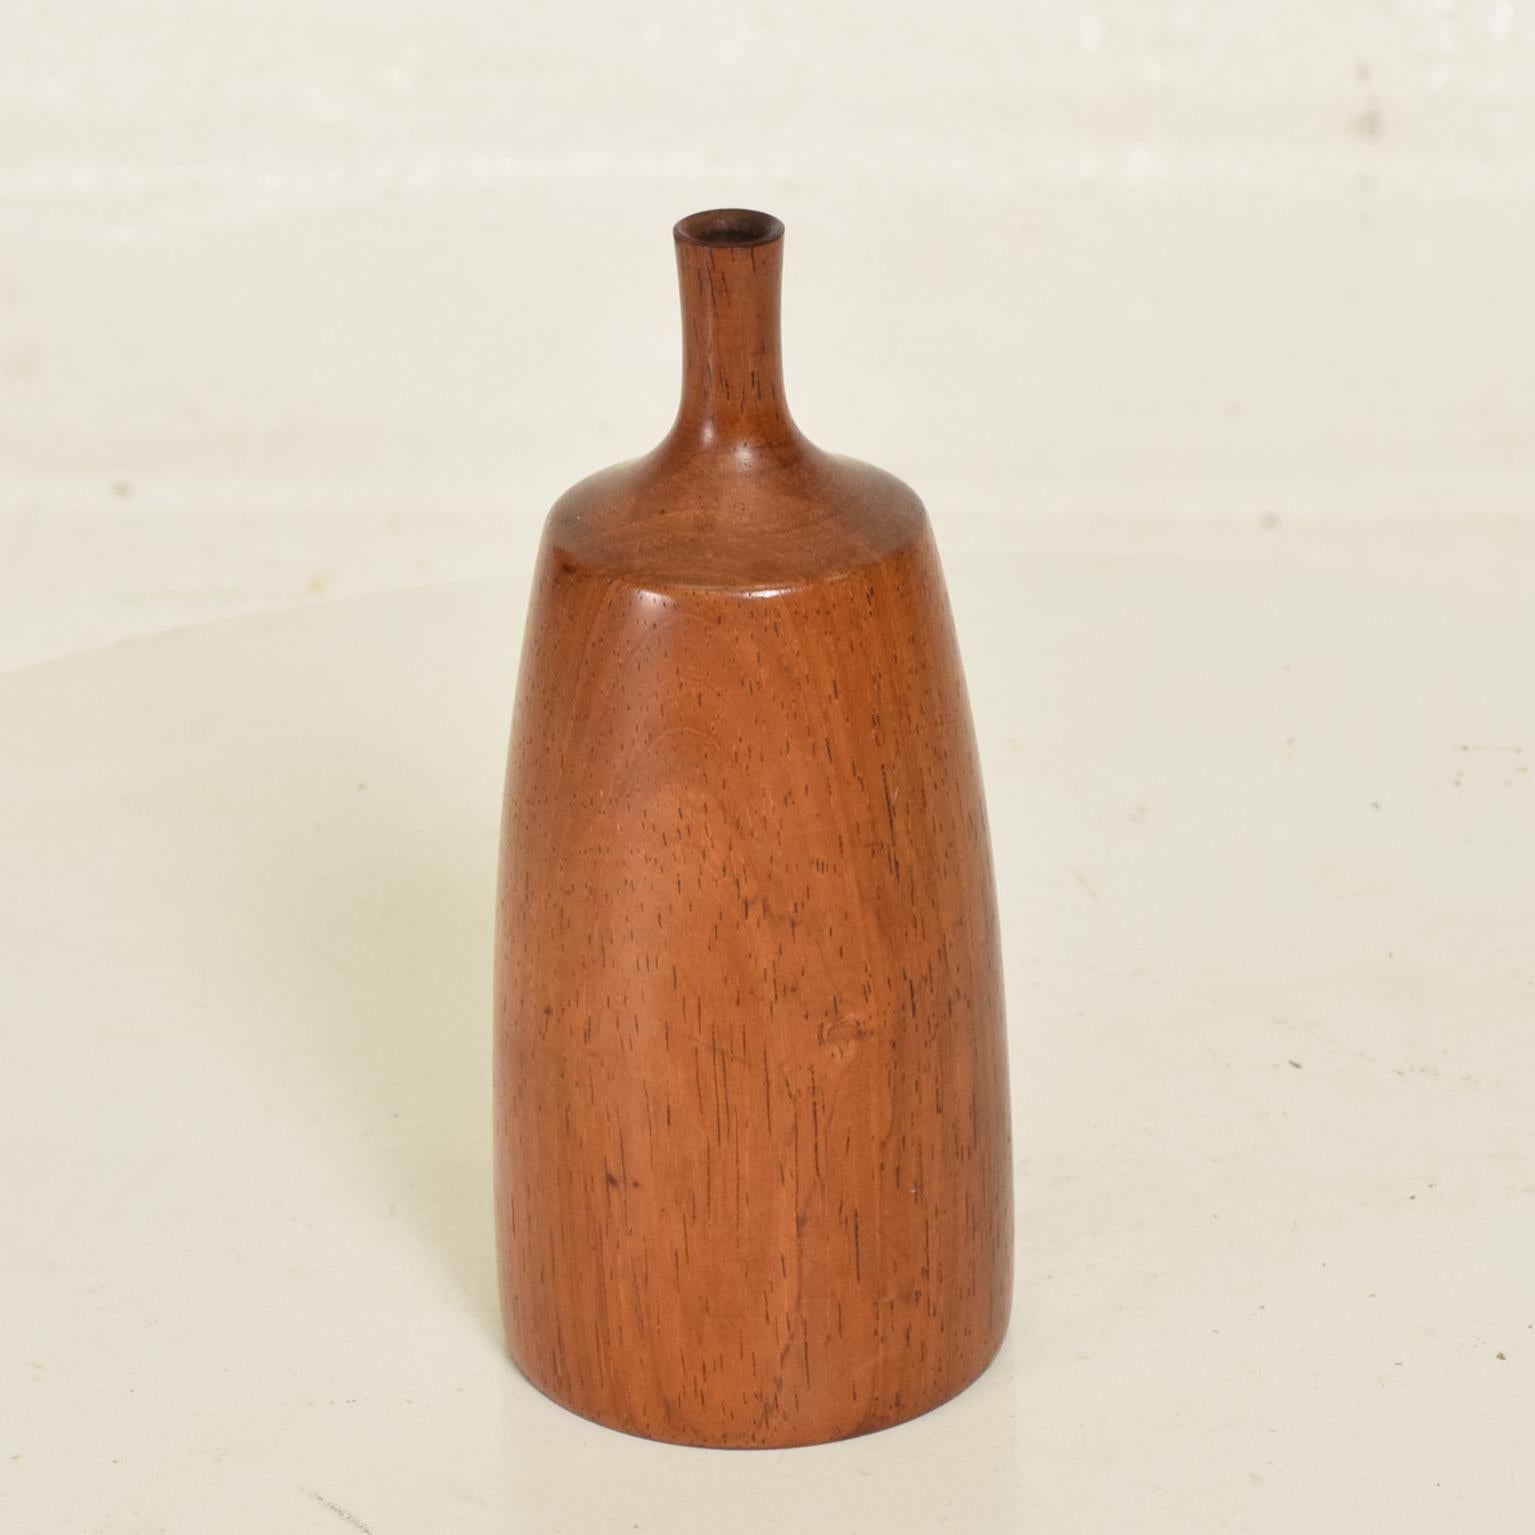 For your consideration, a Mid-Century Modern rosewood sculptural decorative vase by Osolnik Originals. Solid rosewood signed underneath 